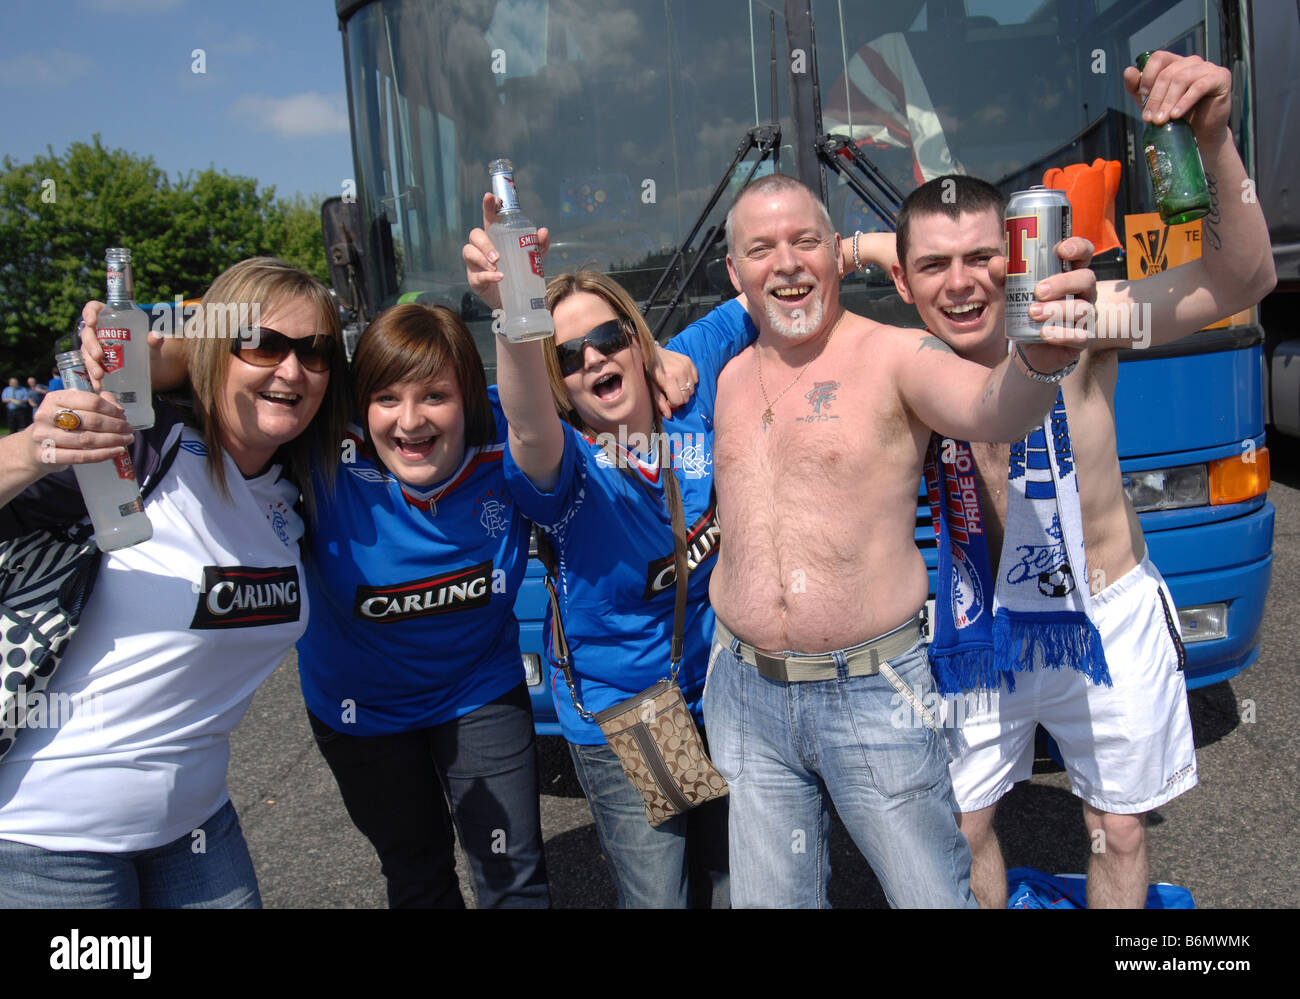 Glasgow Rangers fans gather at a motorway service area before the UEFA Cup Final 2008 against Zenit St Petersburg Stock Photo